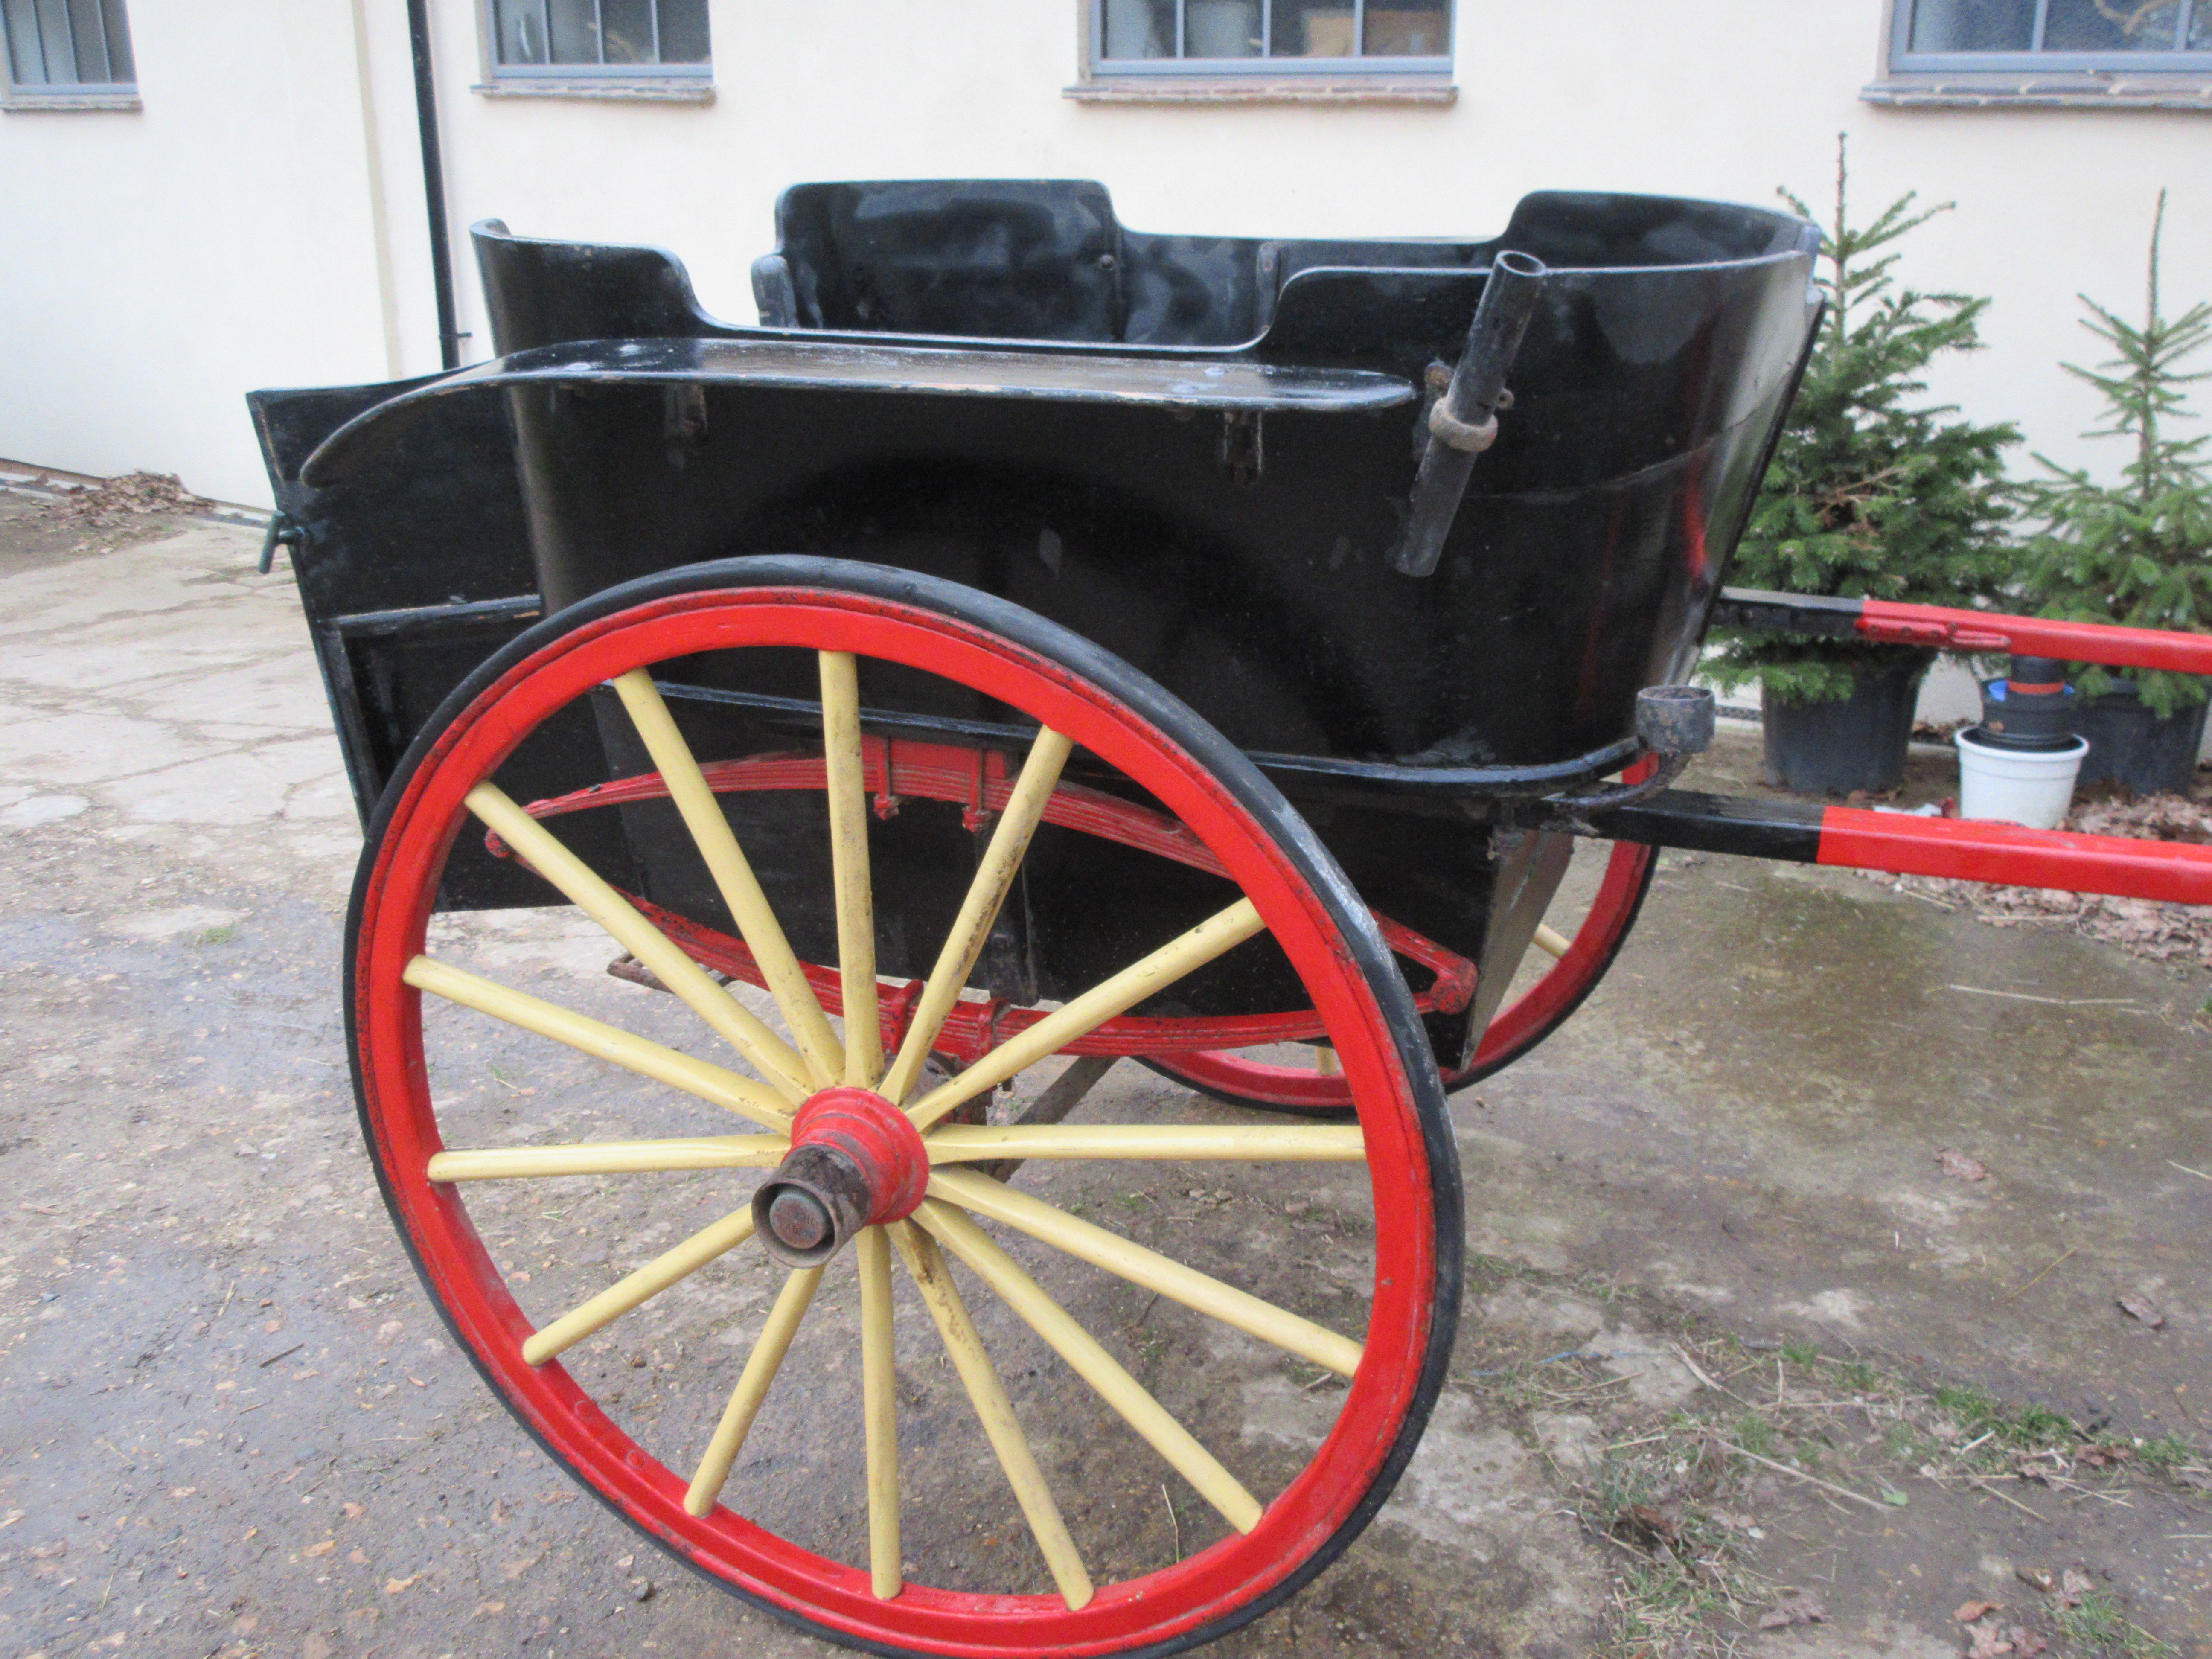 GOVERNESS CART built by Mackrill of Reading circa 1920